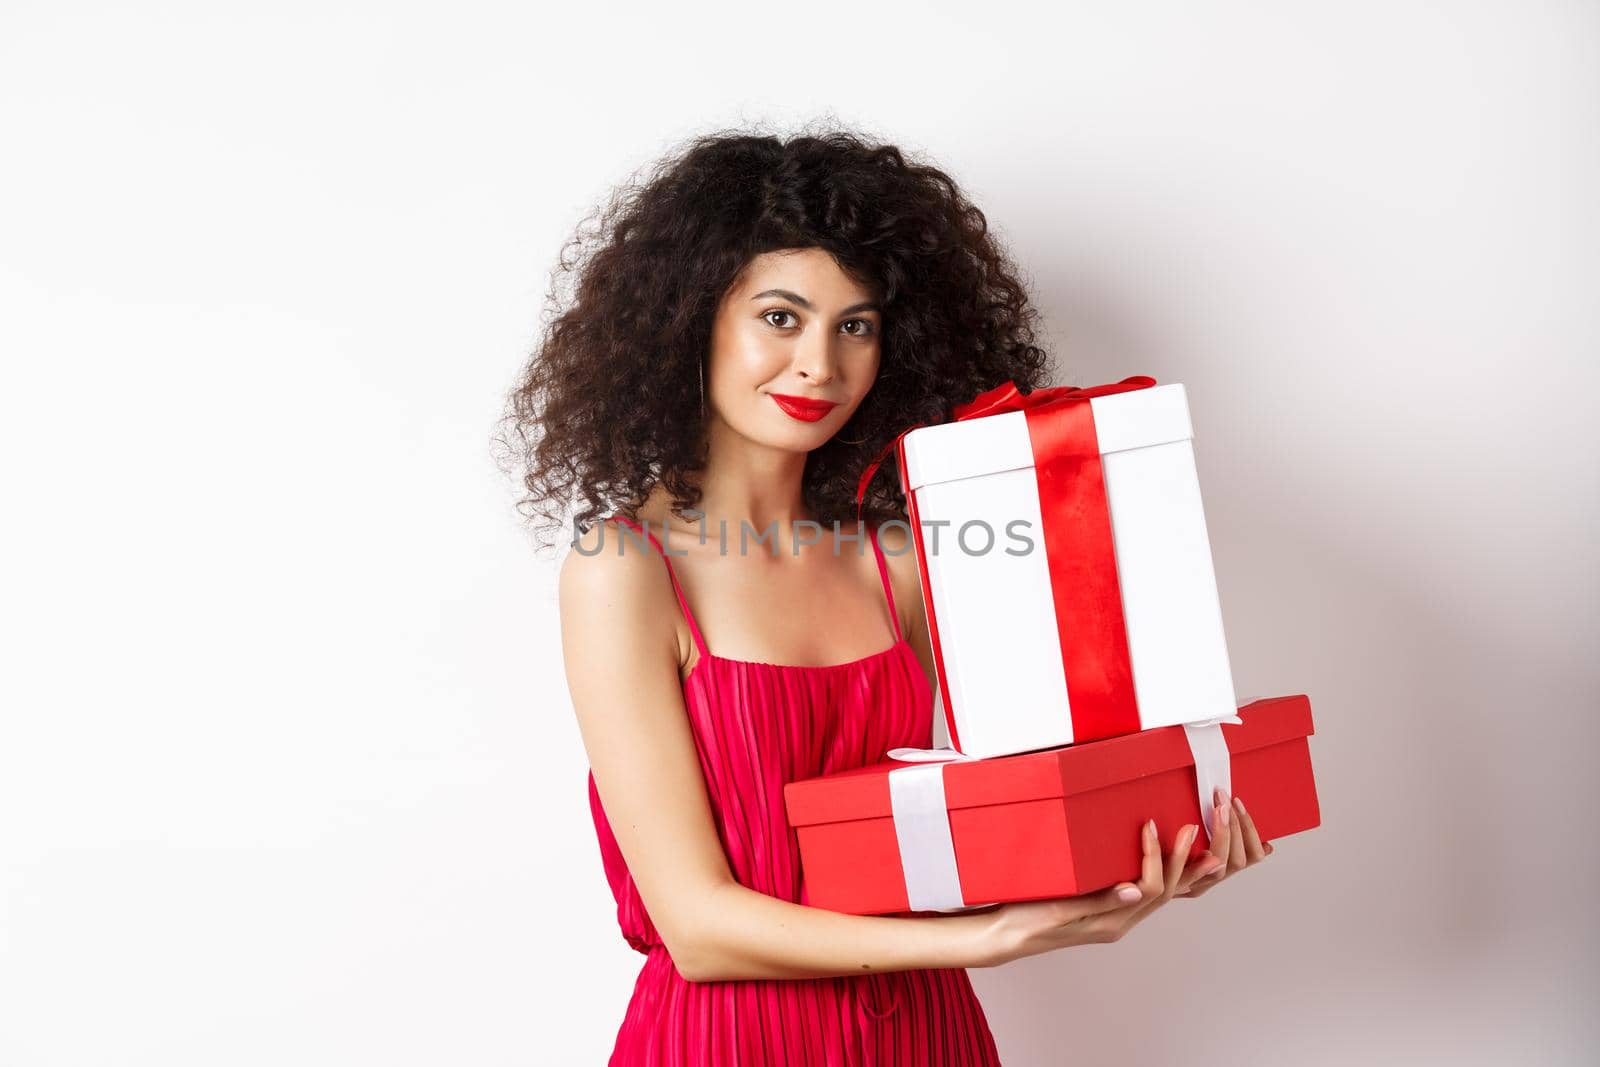 Elegant woman holding Valentines day gifts and smiling romantic at camera, standing in red dress on white background.